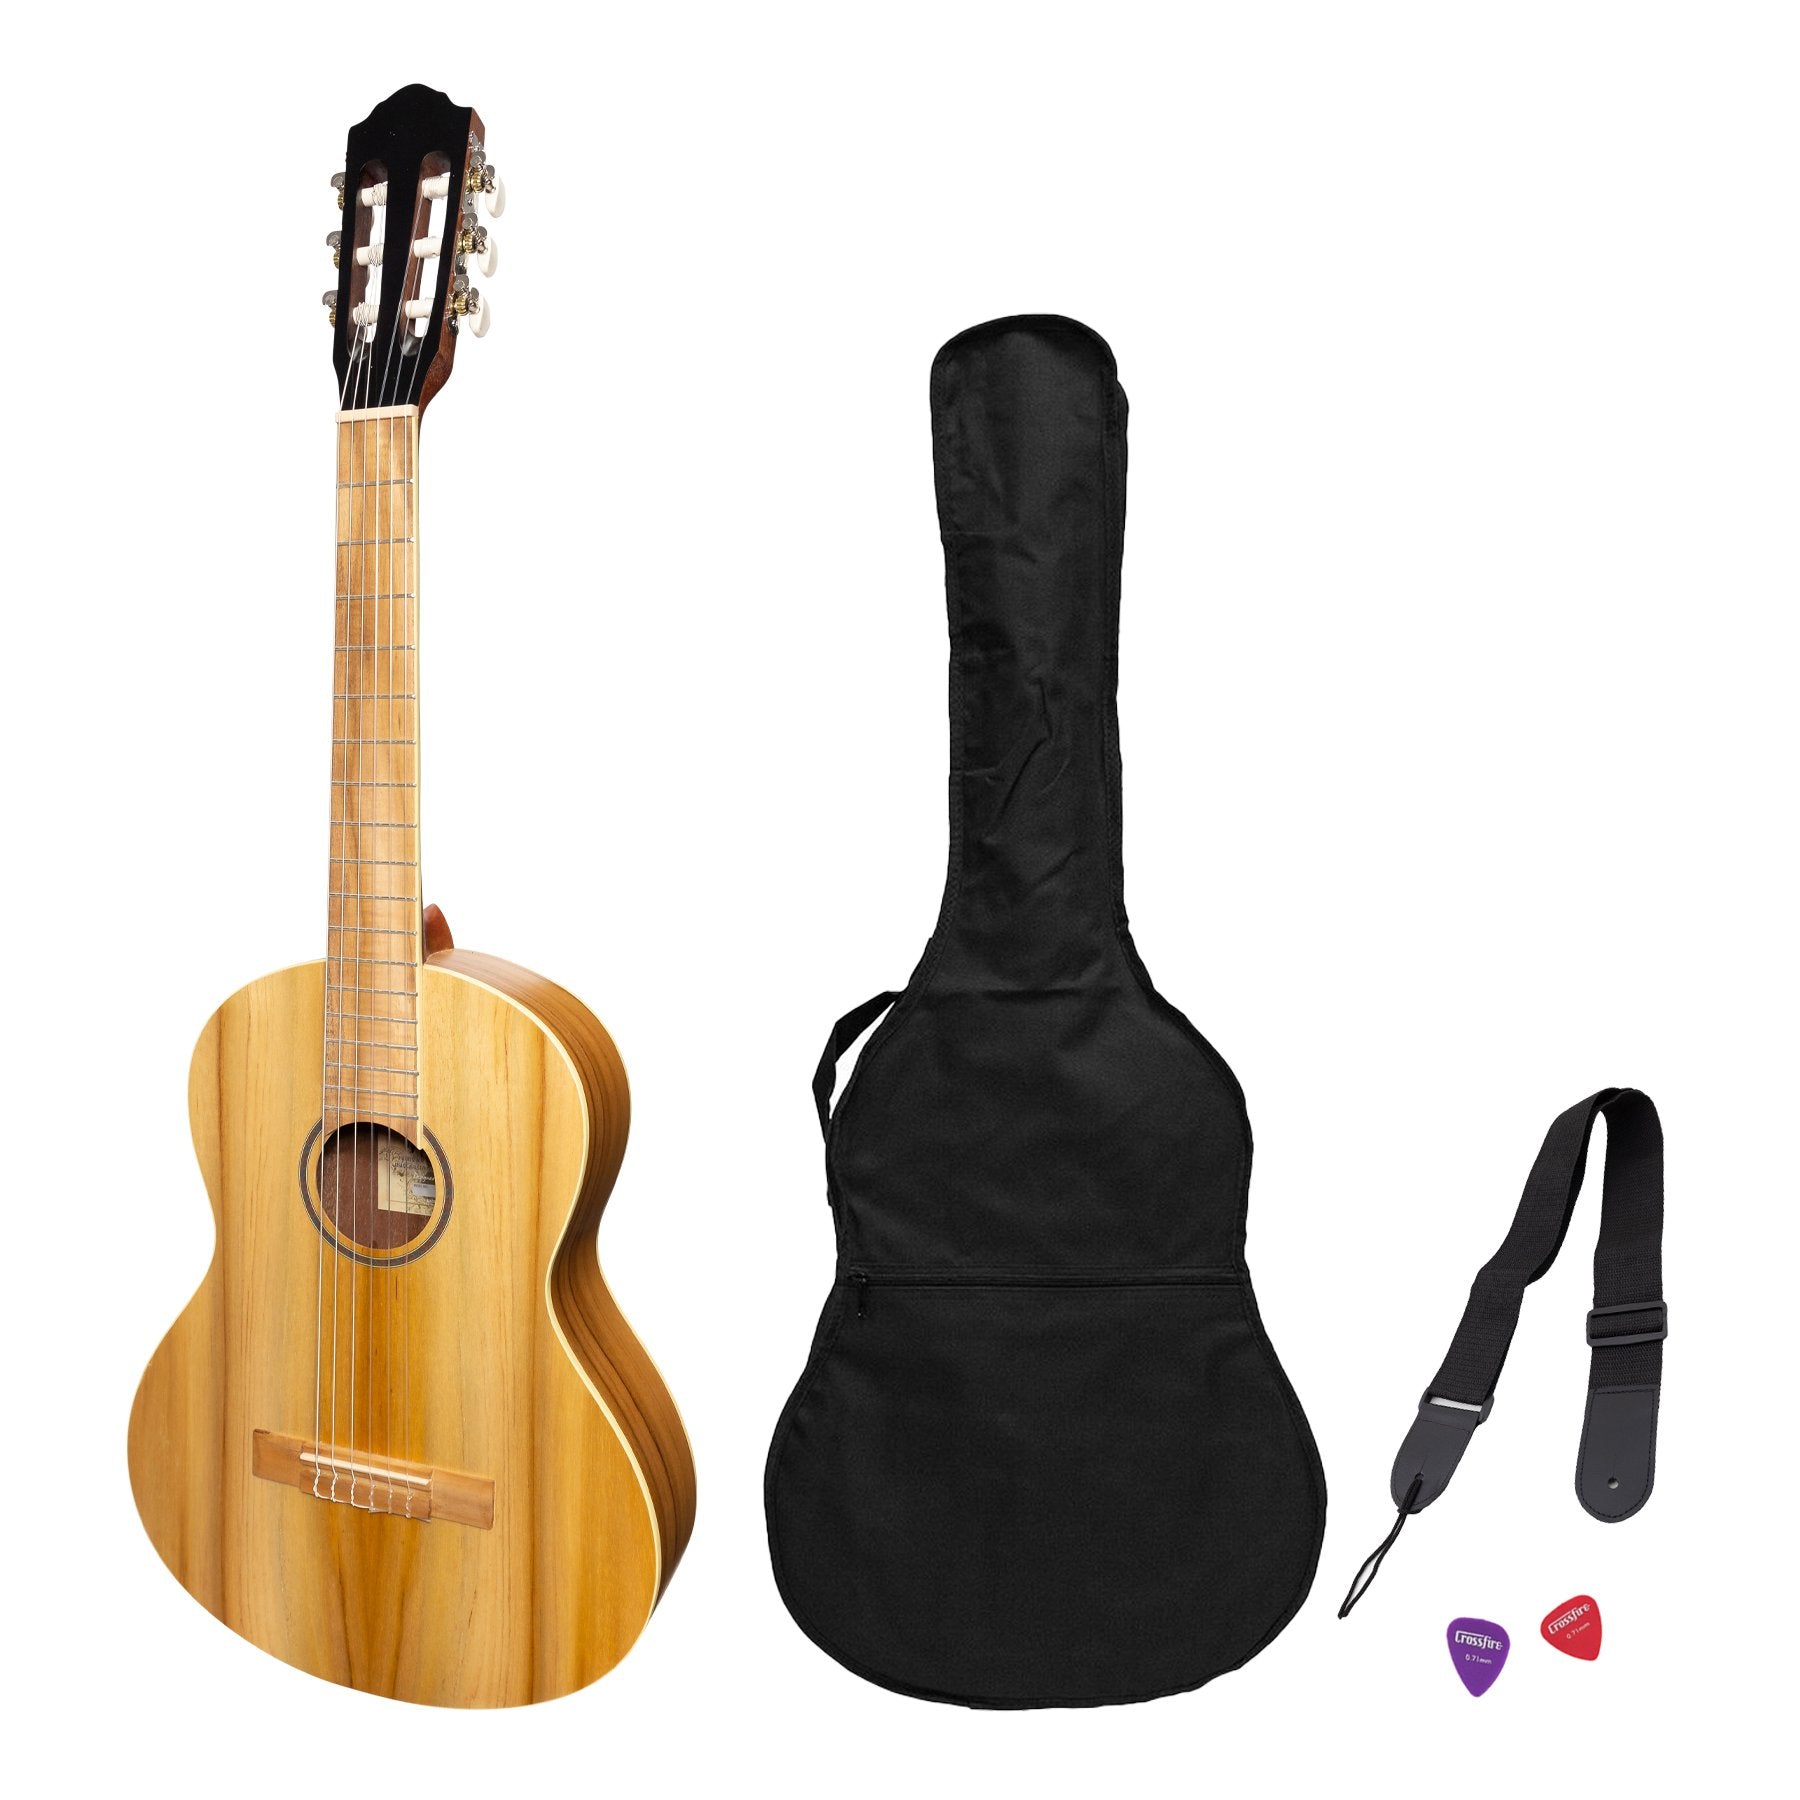 Martinez 3/4 Size Student Classical Guitar Pack with Built In Tuner (Jati-Teakwood)-MP-34T-JTK